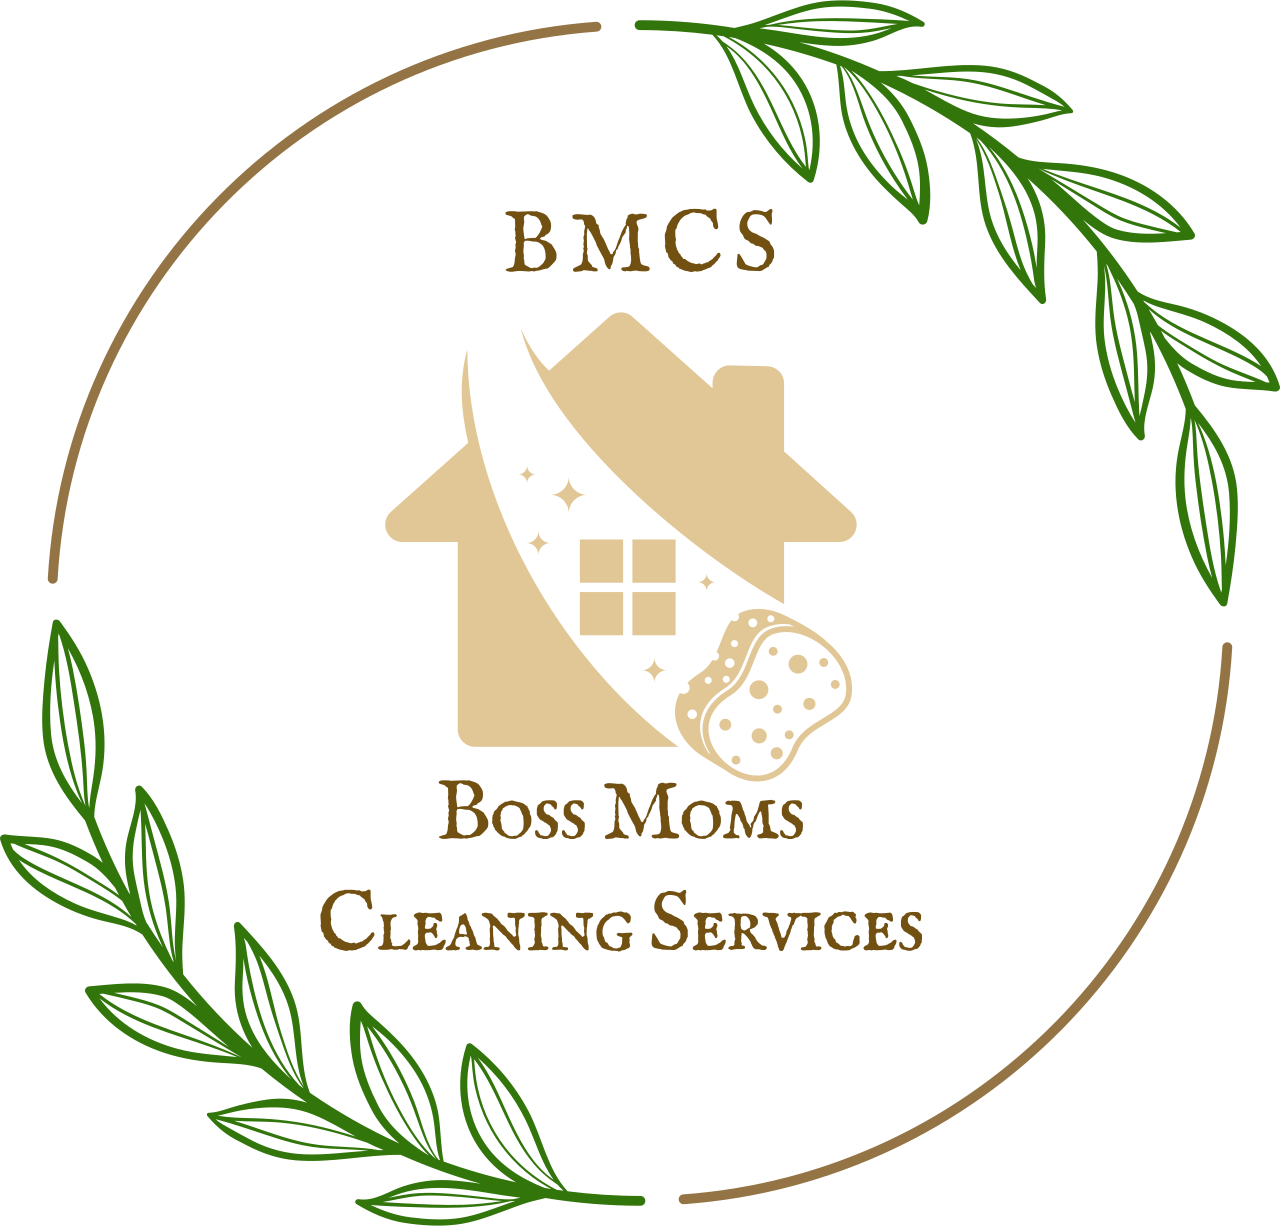 Boss Moms
Cleaning Services's web page